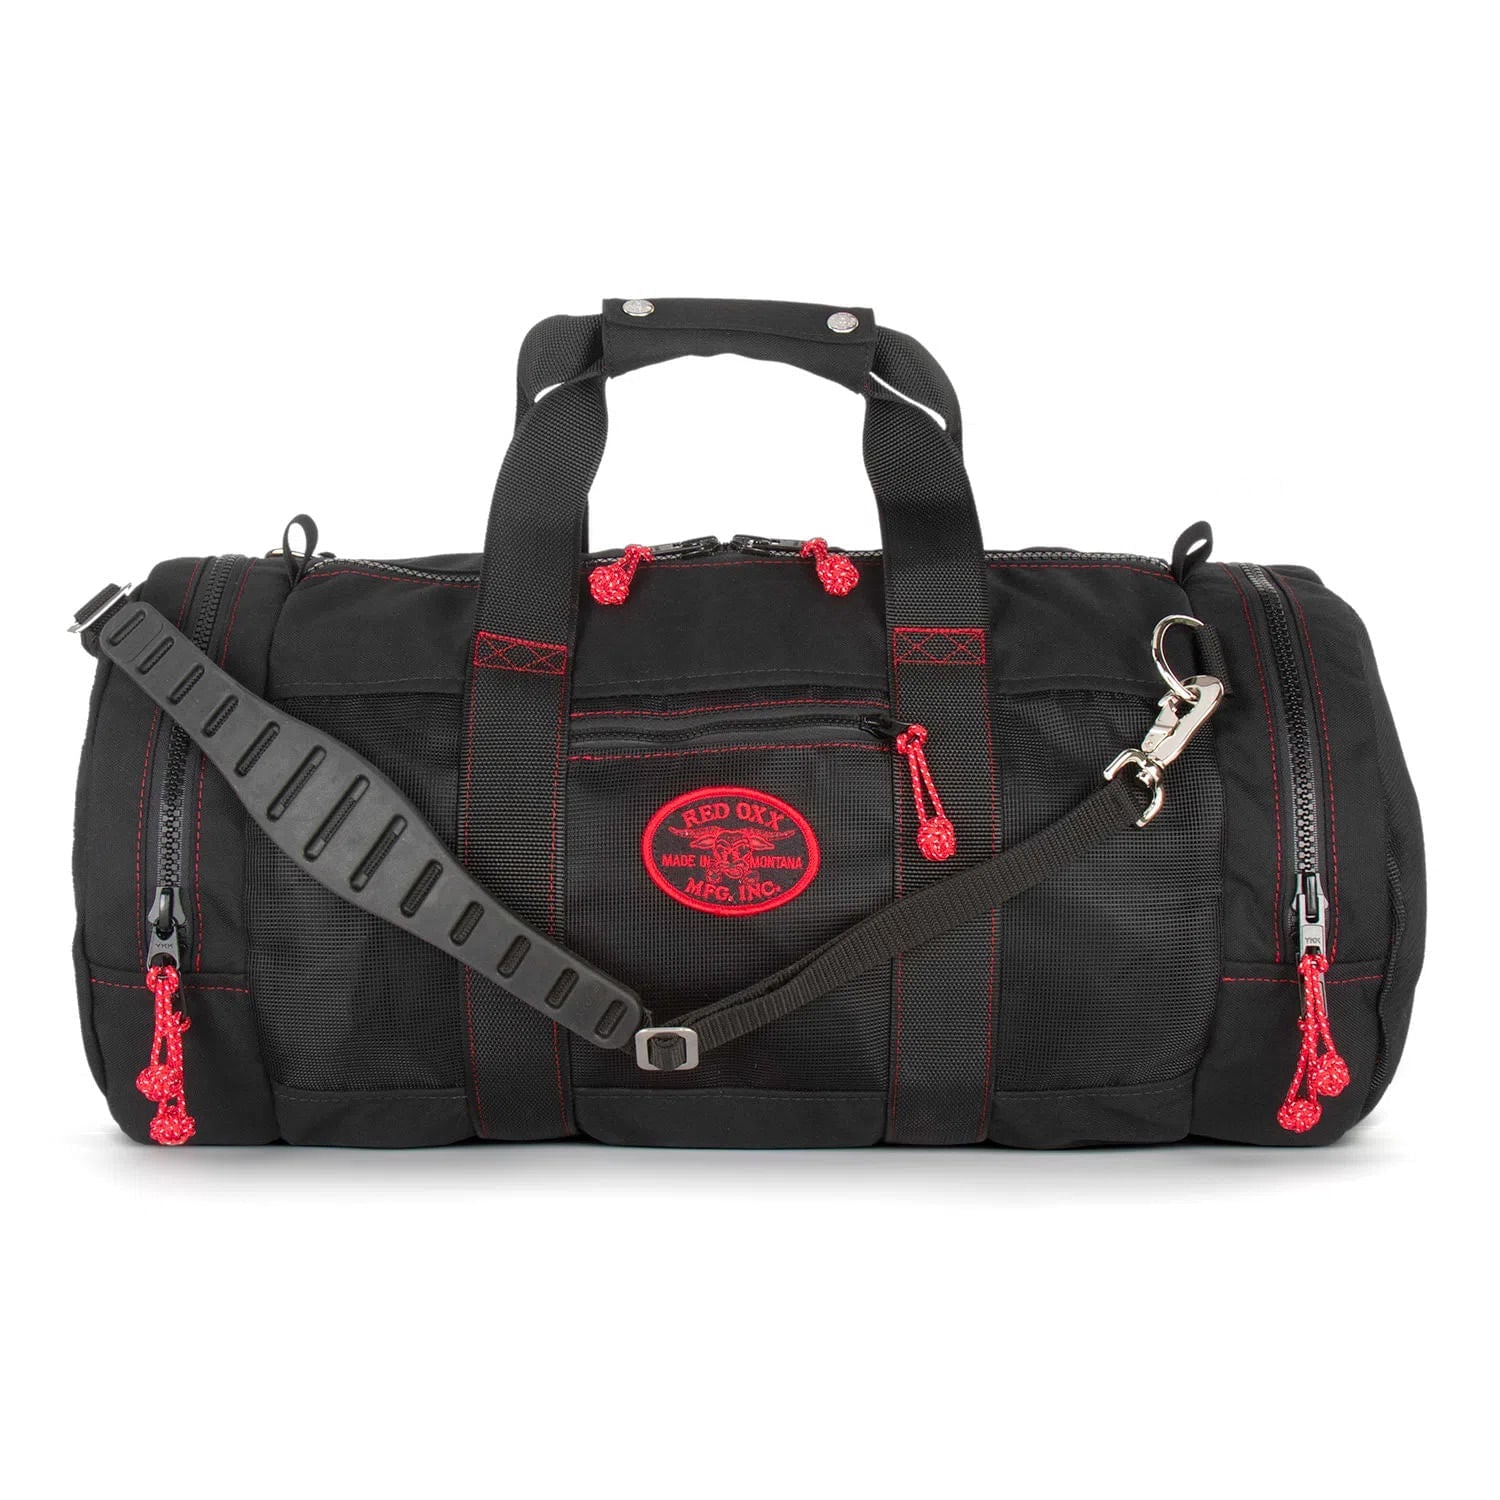 Personalized Gym Bags: embroidered sports bags | Vistaprint